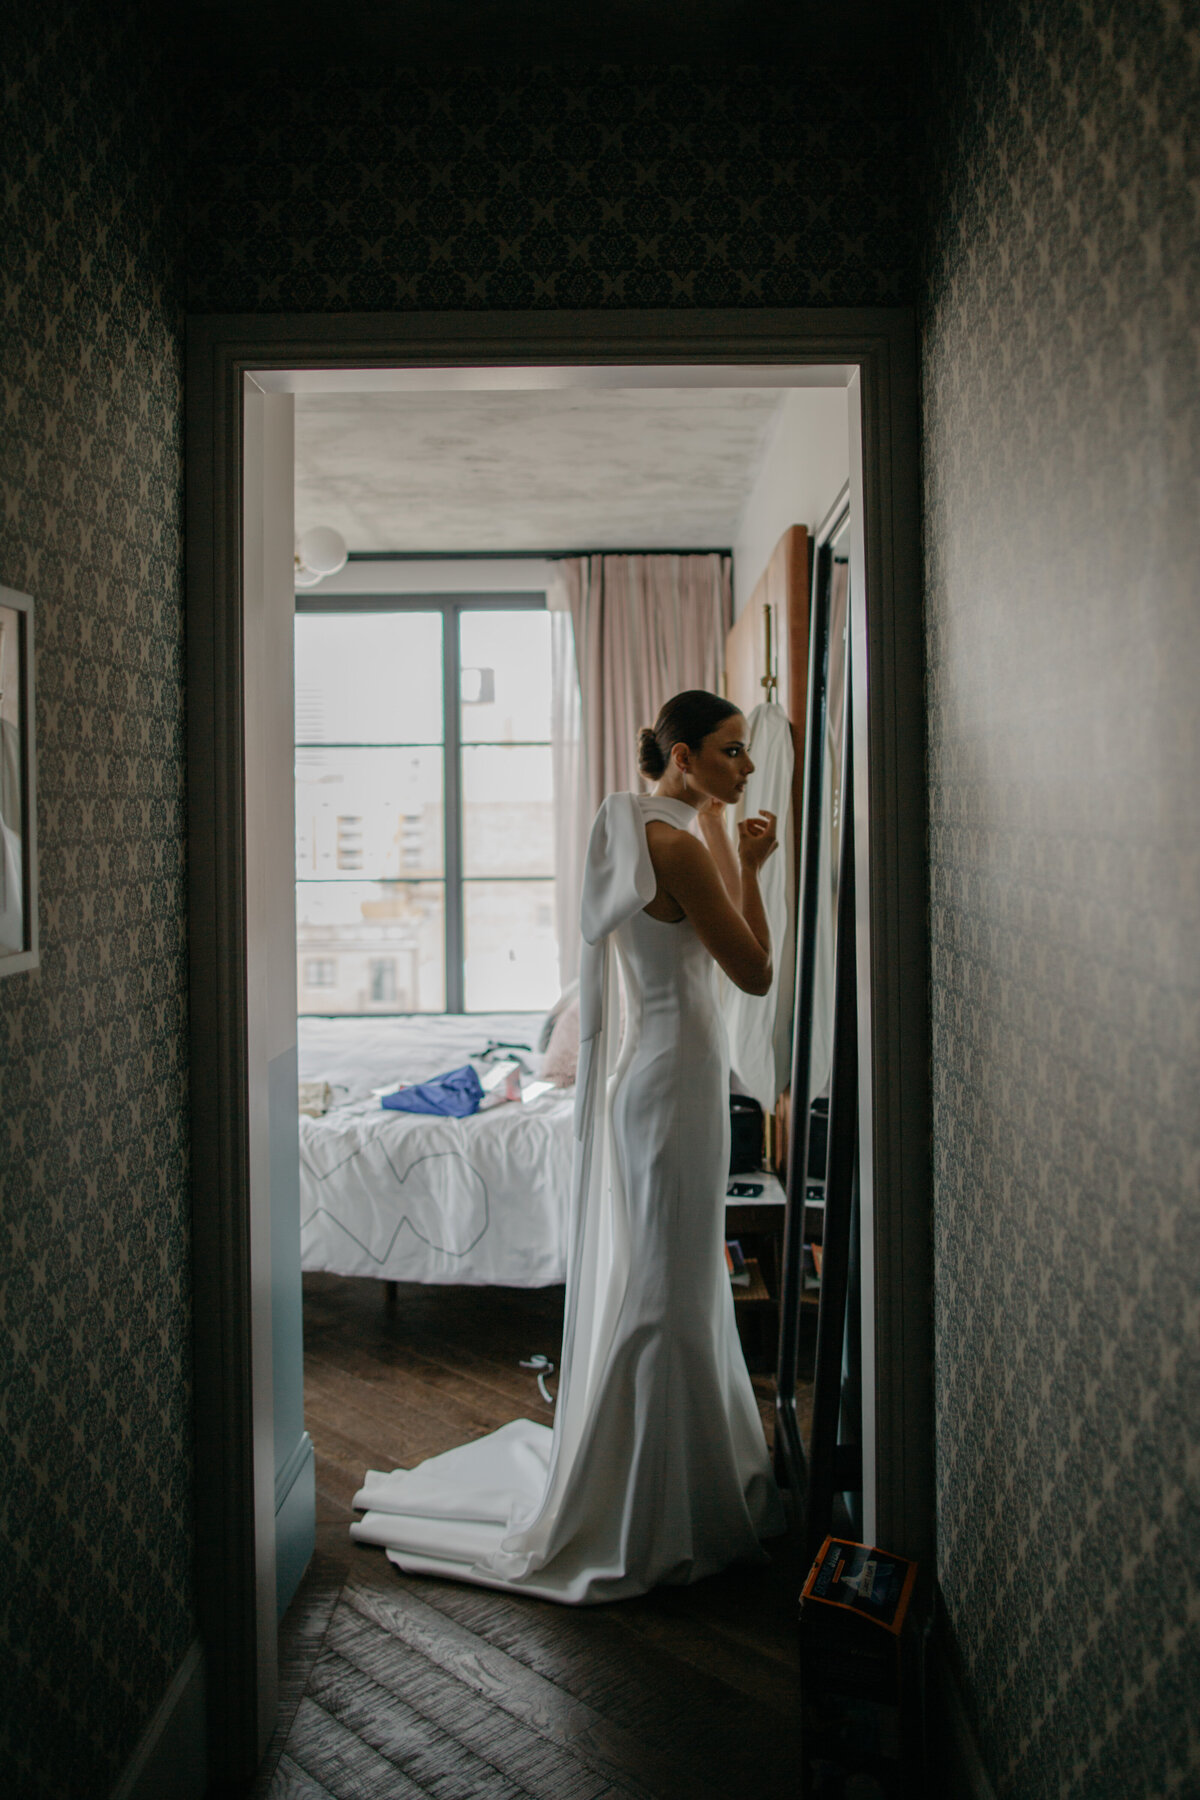 Bride looking into mirror while getting ready